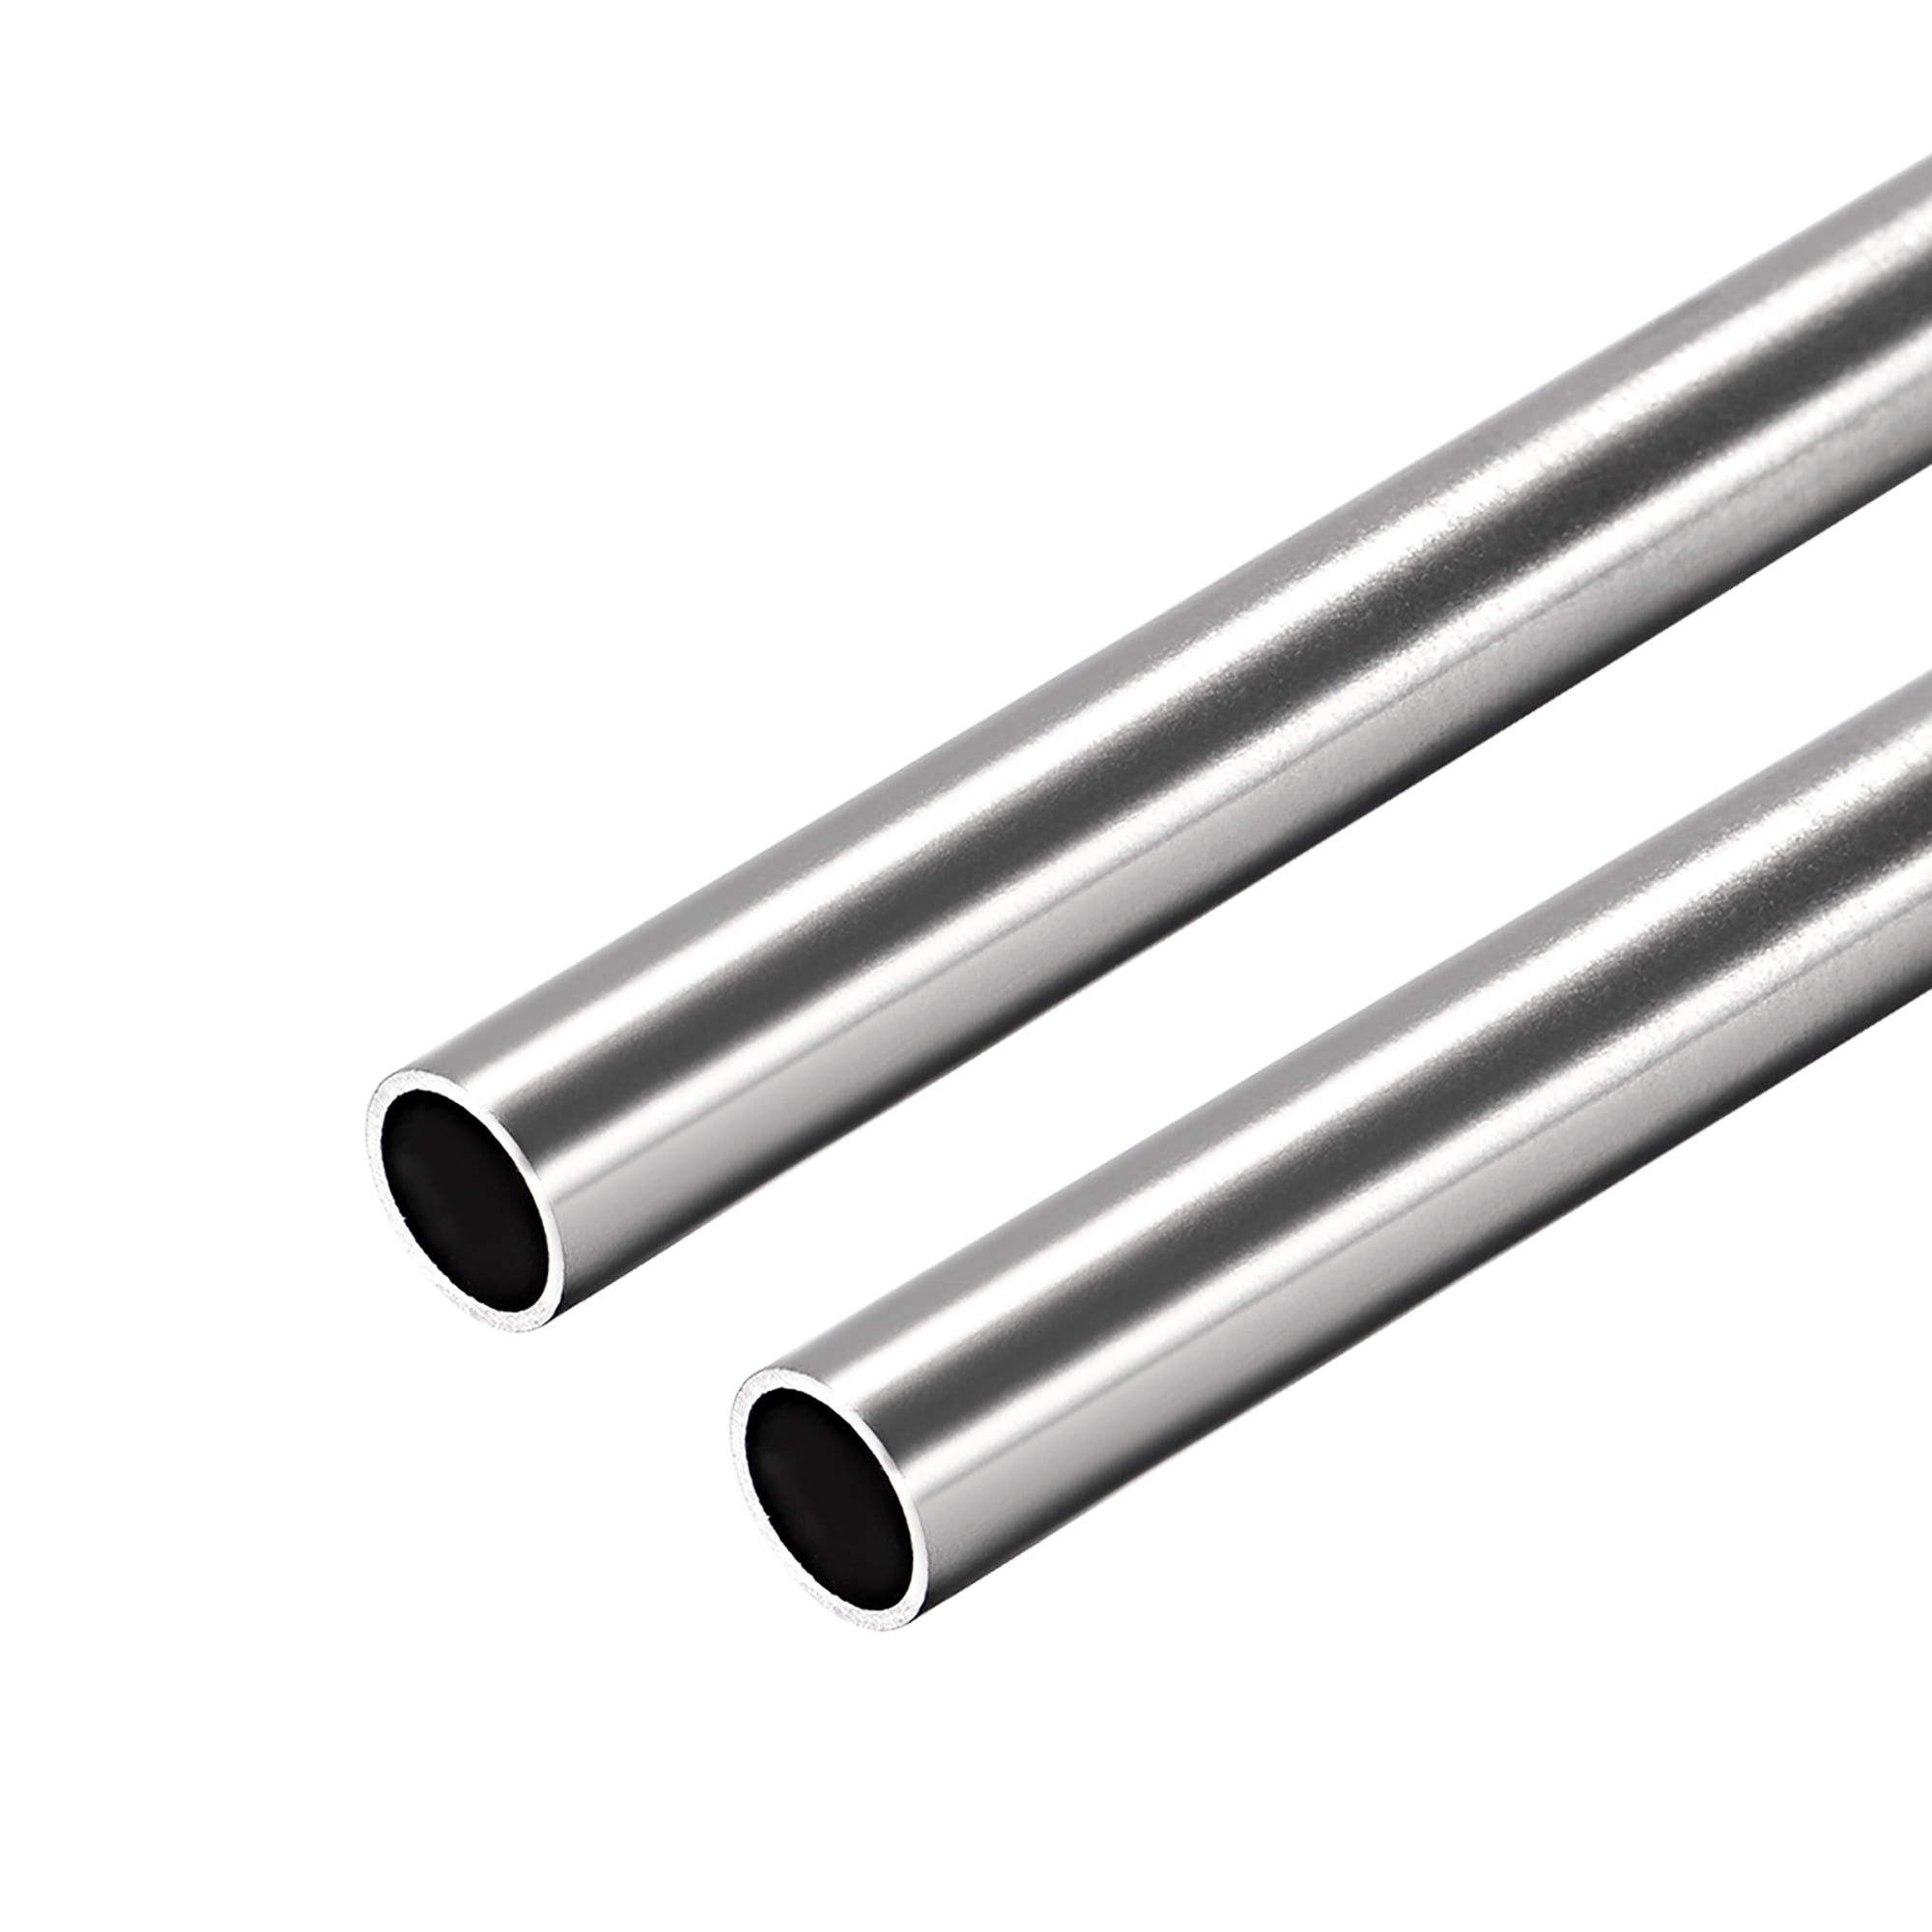 304 Stainless Steel Round Tubing 250mm Length 10mm OD 0.8mm Wall Telescoping Thin Wall Steel Tubing With Buttom Clips